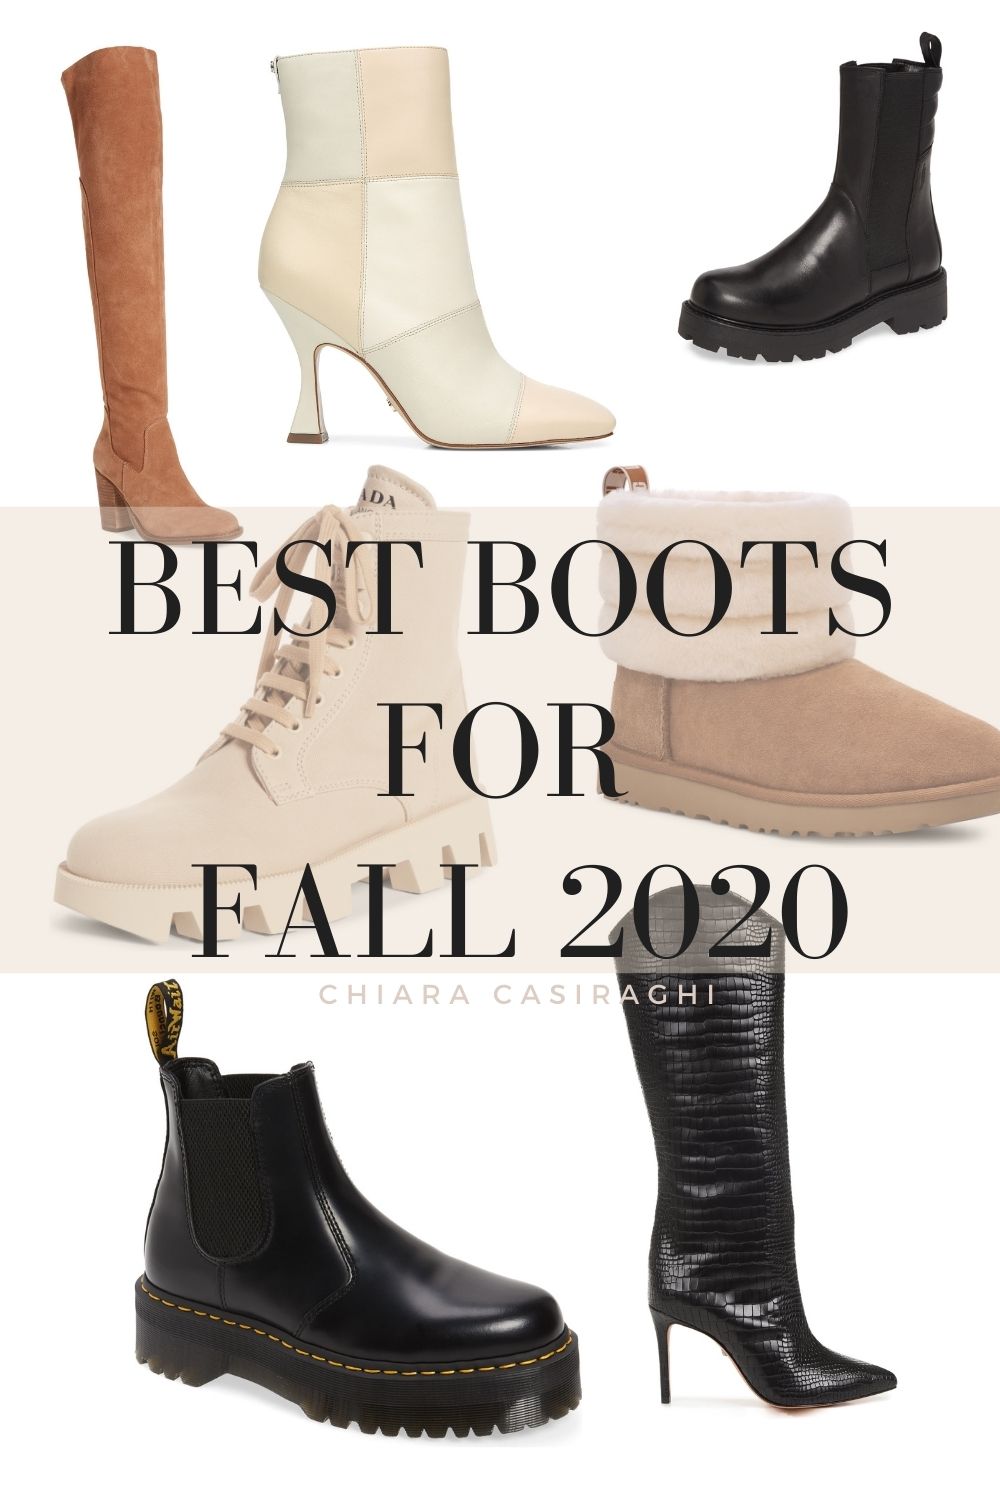 BEST FALL BOOTS FOR FALL 2020 - Chiara